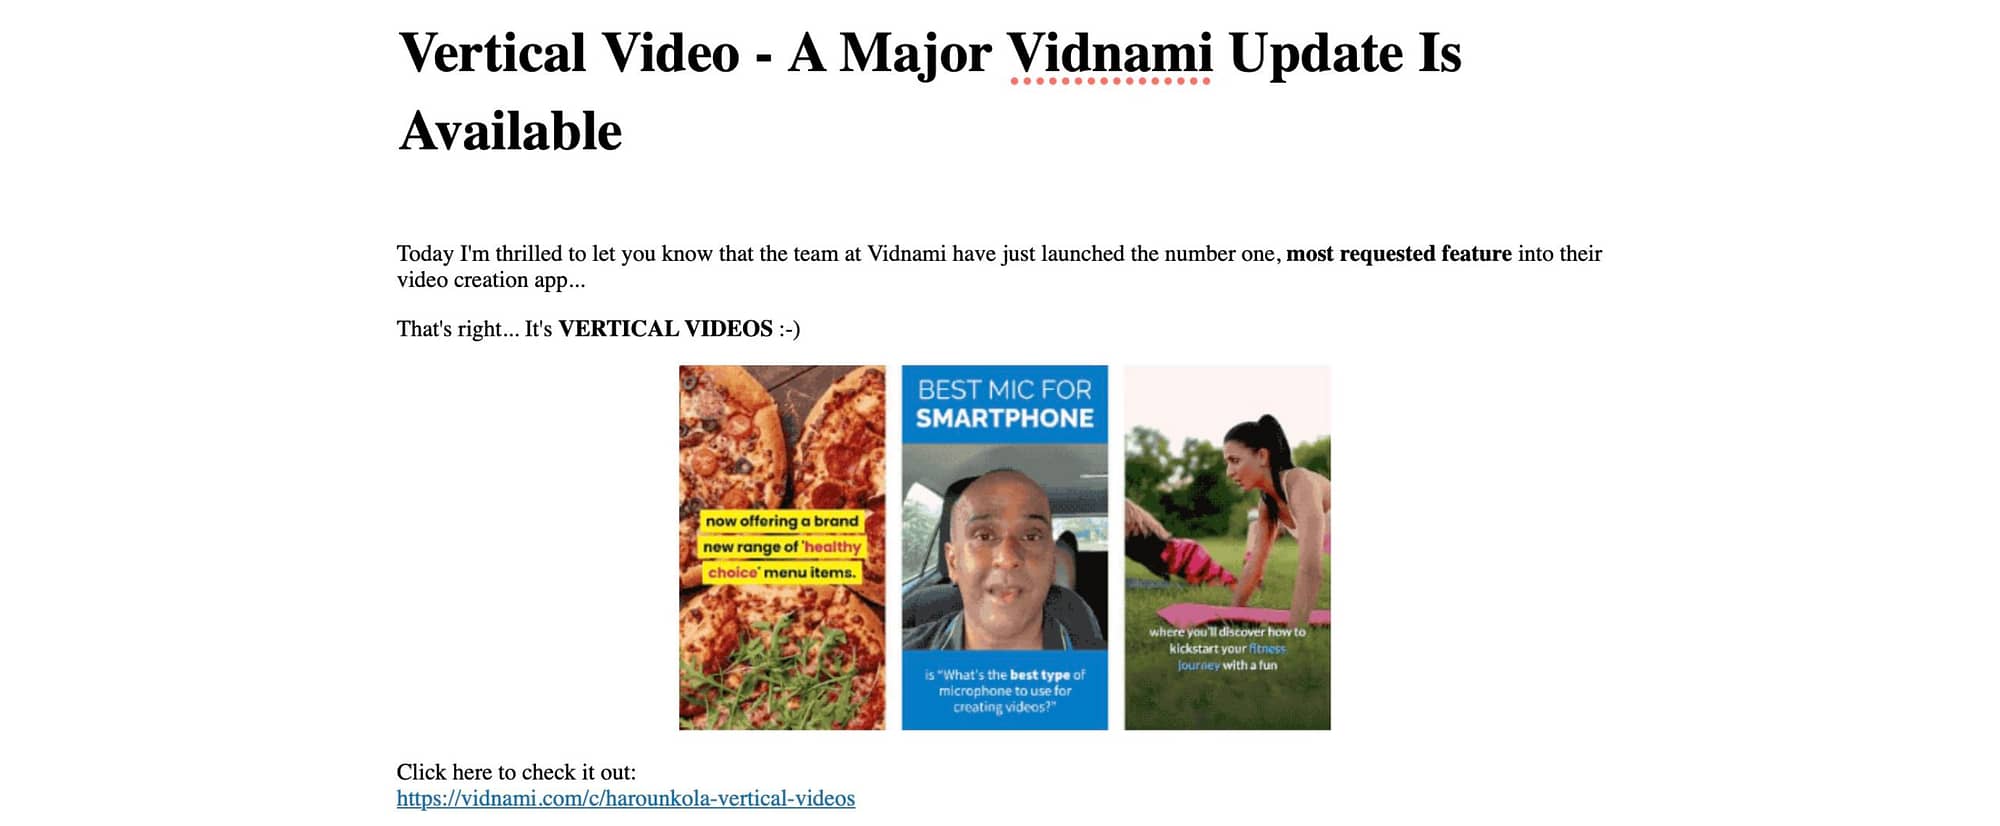 Vertical Video – A Major Vidnami Update Is Available